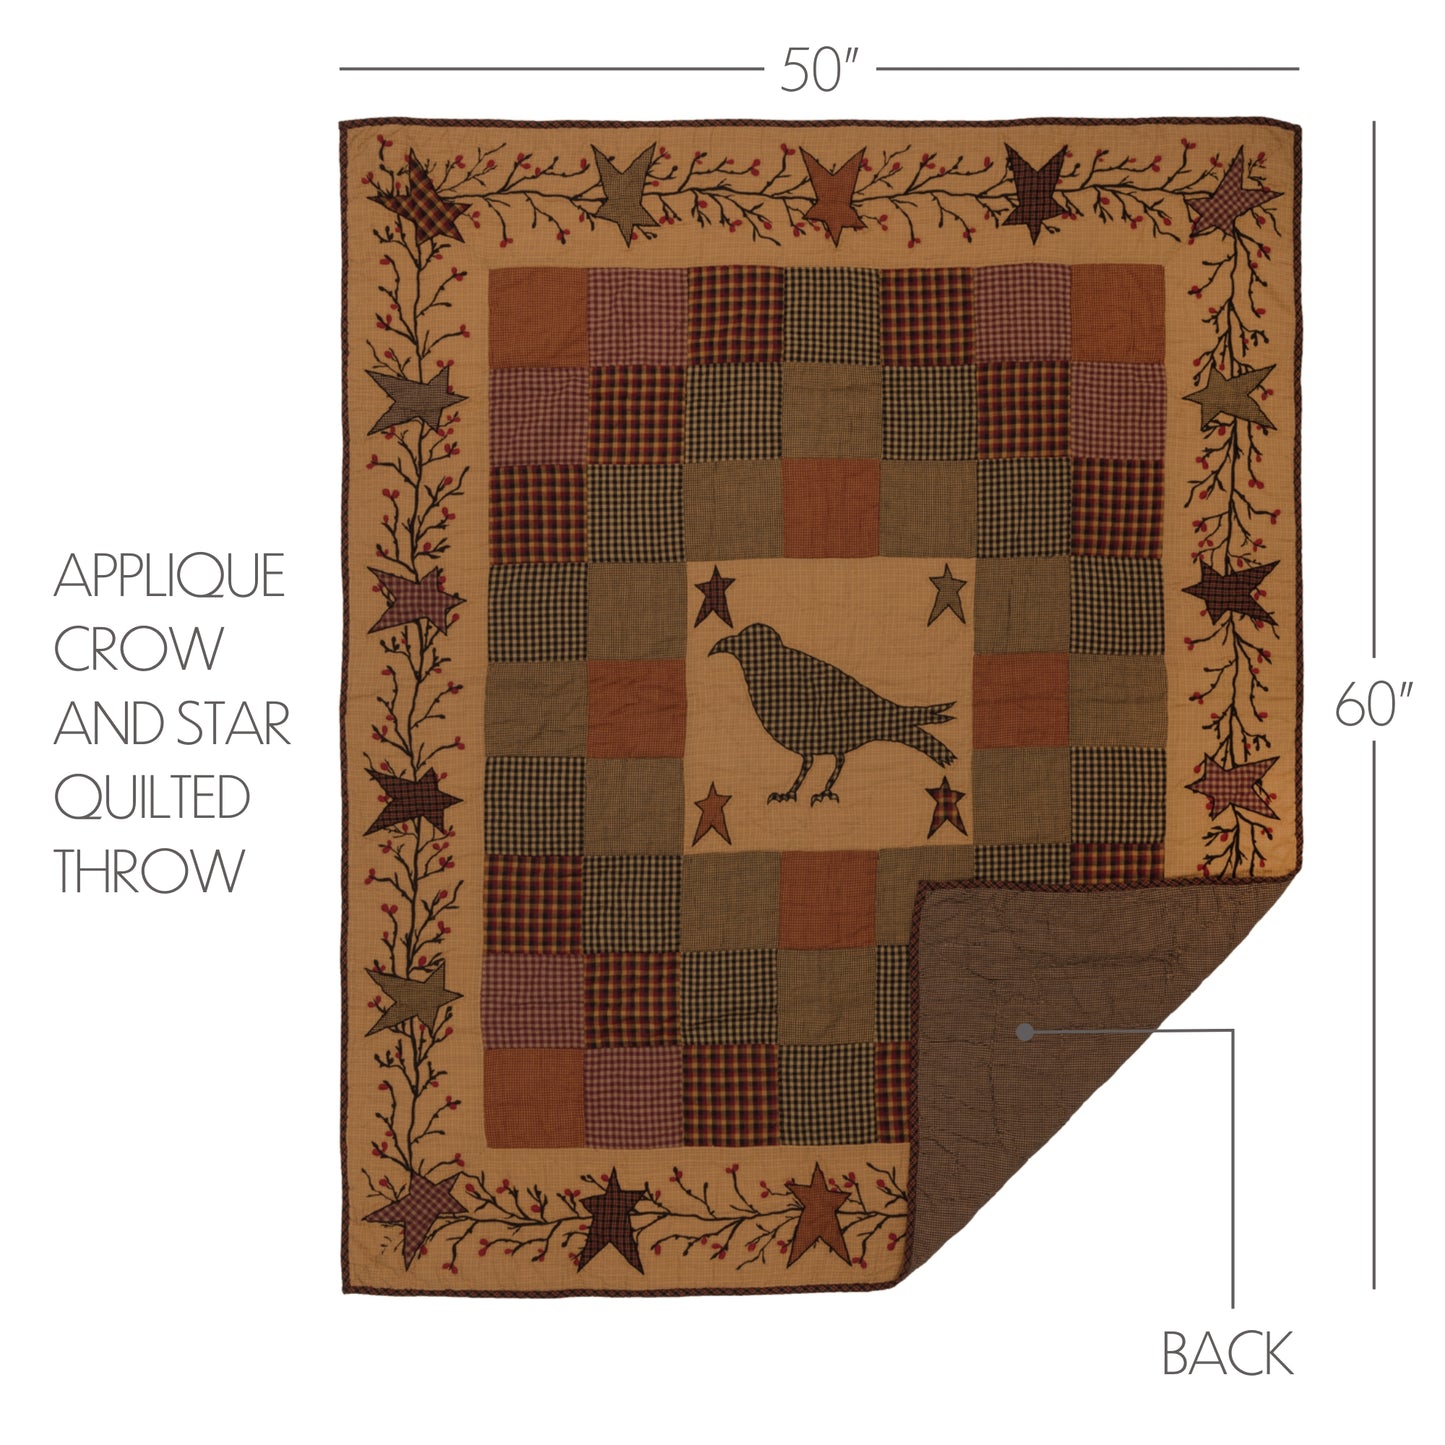 45786-Heritage-Farms-Applique-Crow-and-Star-Quilted-Throw-60x50-image-1